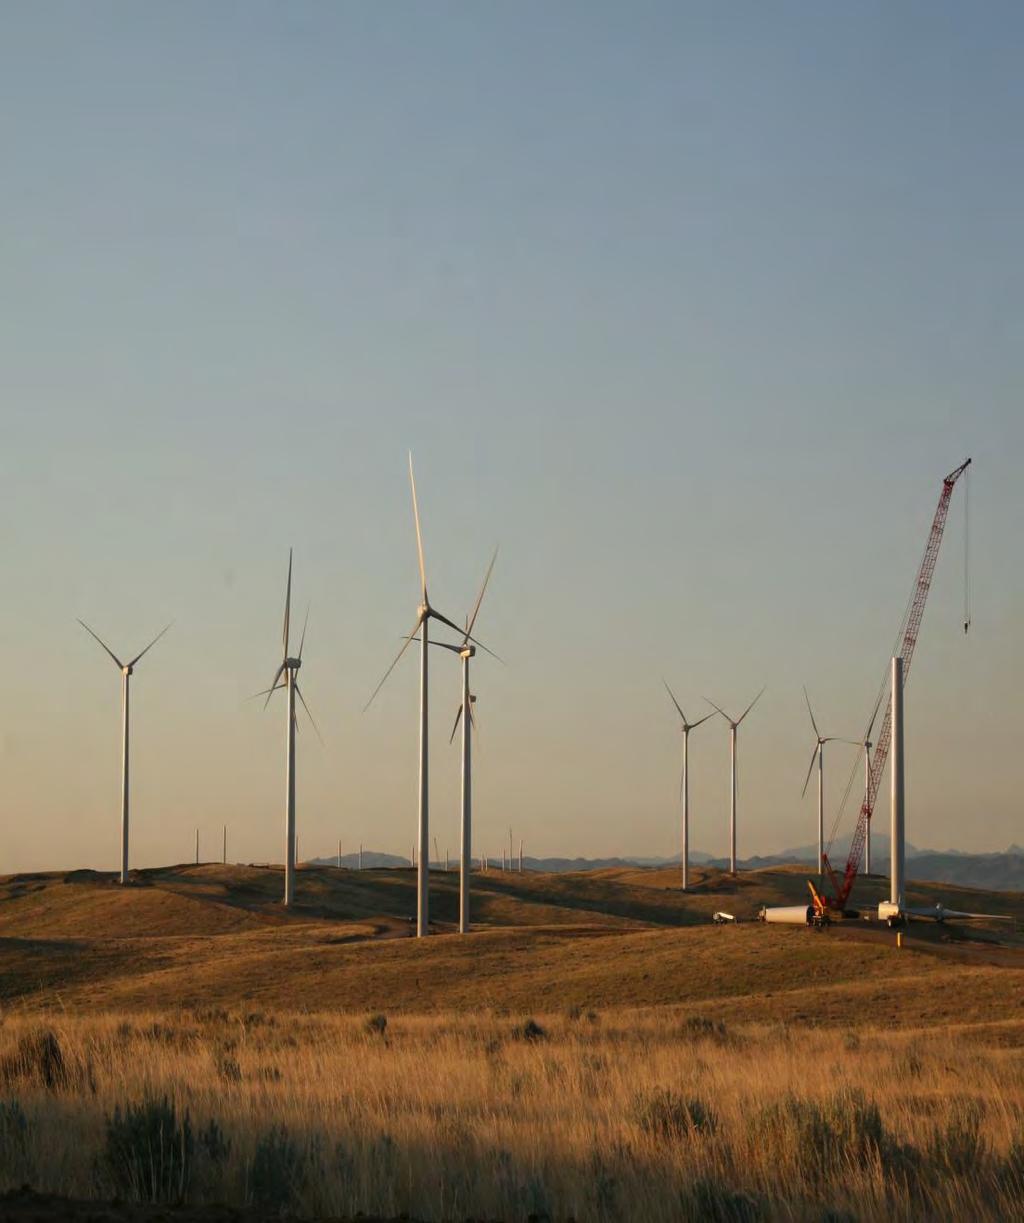 Energy Vision 2020 Creates between 1,200 and 1,600 construction jobs in Wyoming Adds $115 million in tax revenue through